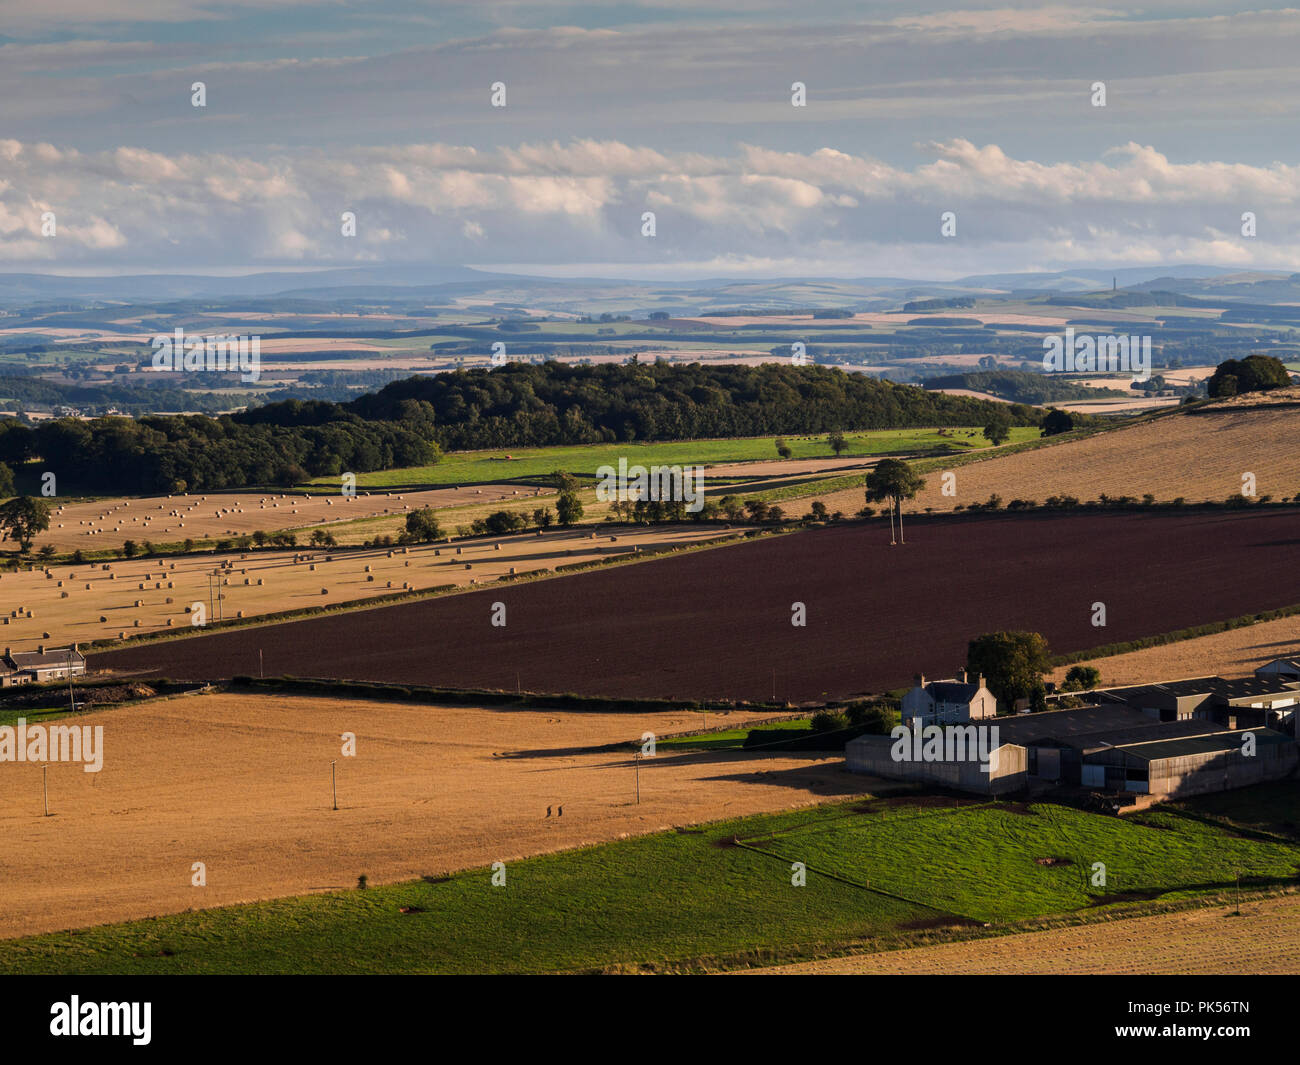 Looking from Hume Castle in Berwicvkshire, southwards across rich farm land towards the Cheviot Hills beyond Roxburghshire Stock Photo